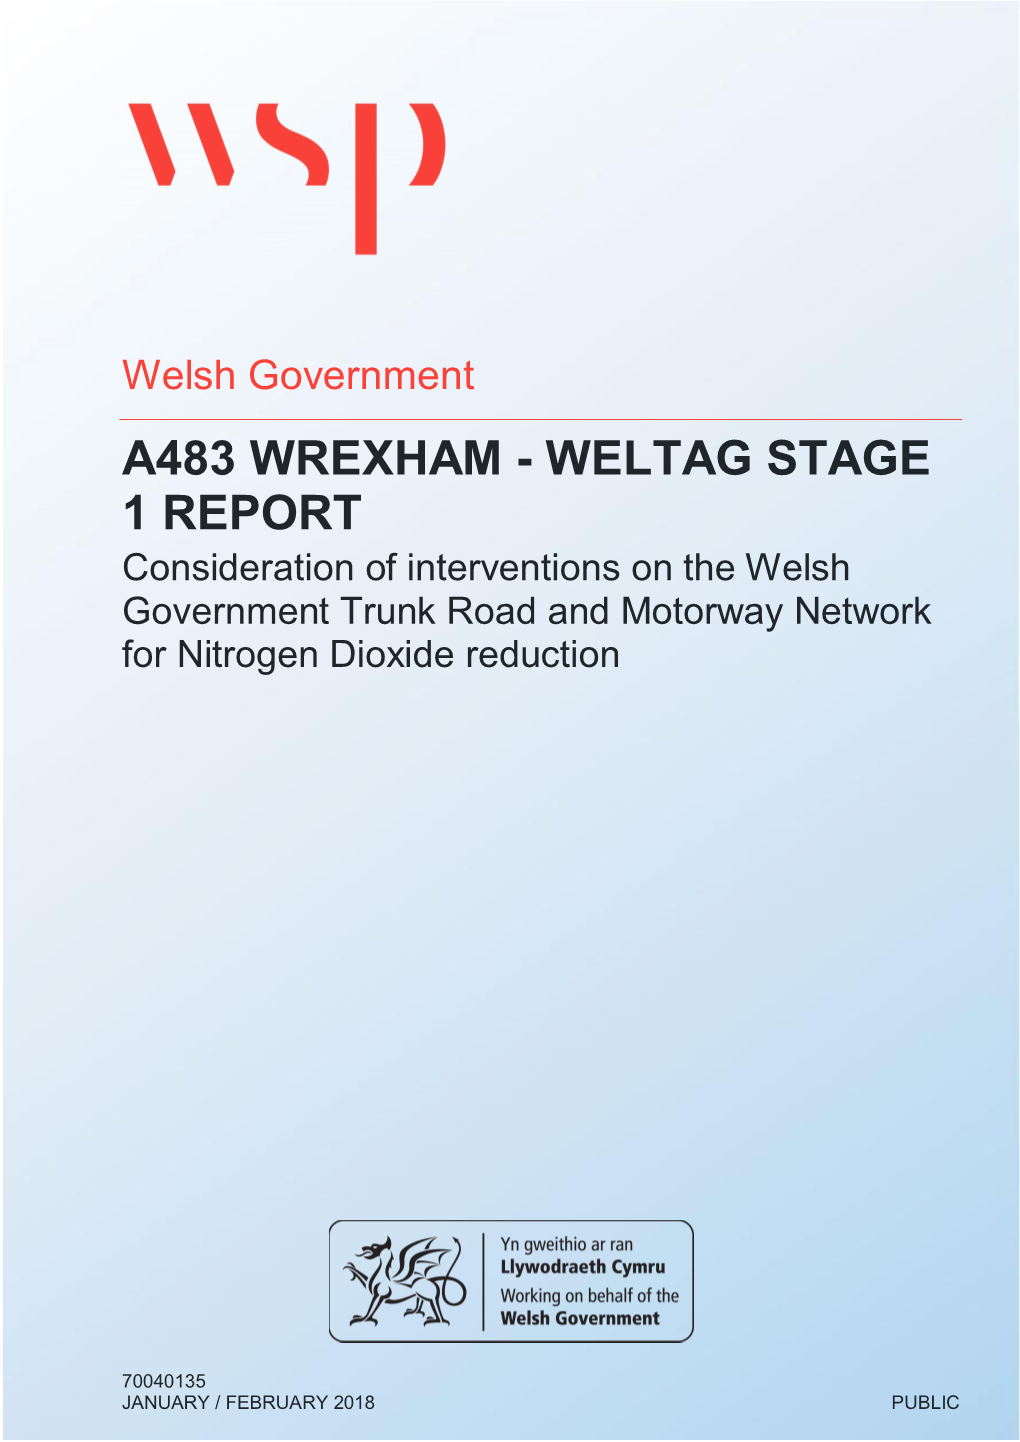 A483 WREXHAM - WELTAG STAGE 1 REPORT Consideration of Interventions on the Welsh Government Trunk Road and Motorway Network for Nitrogen Dioxide Reduction